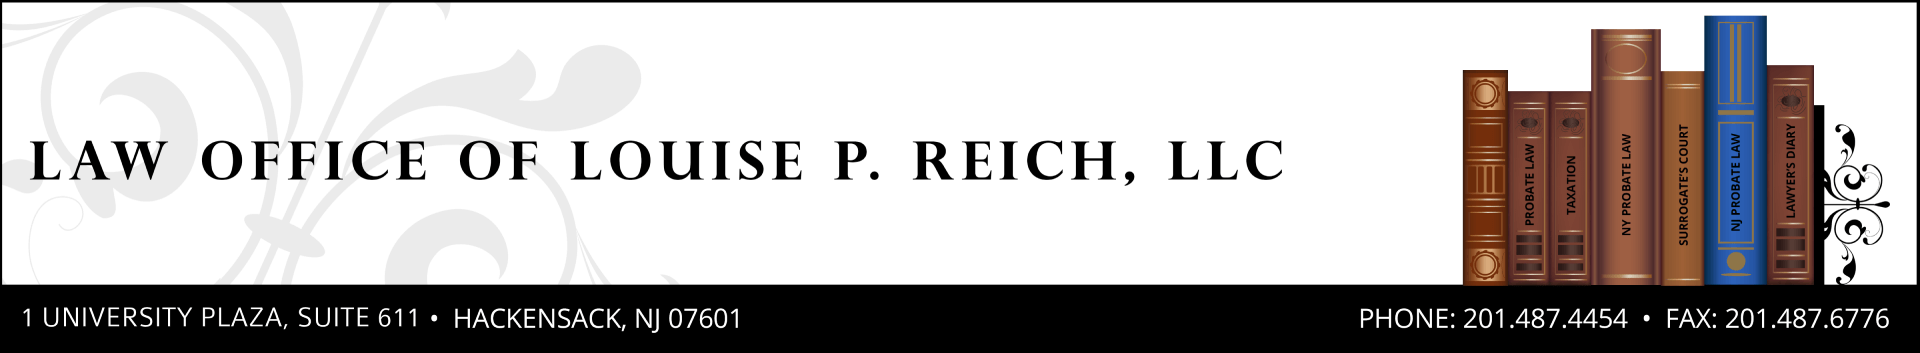 Law Office of Louise P. Reich